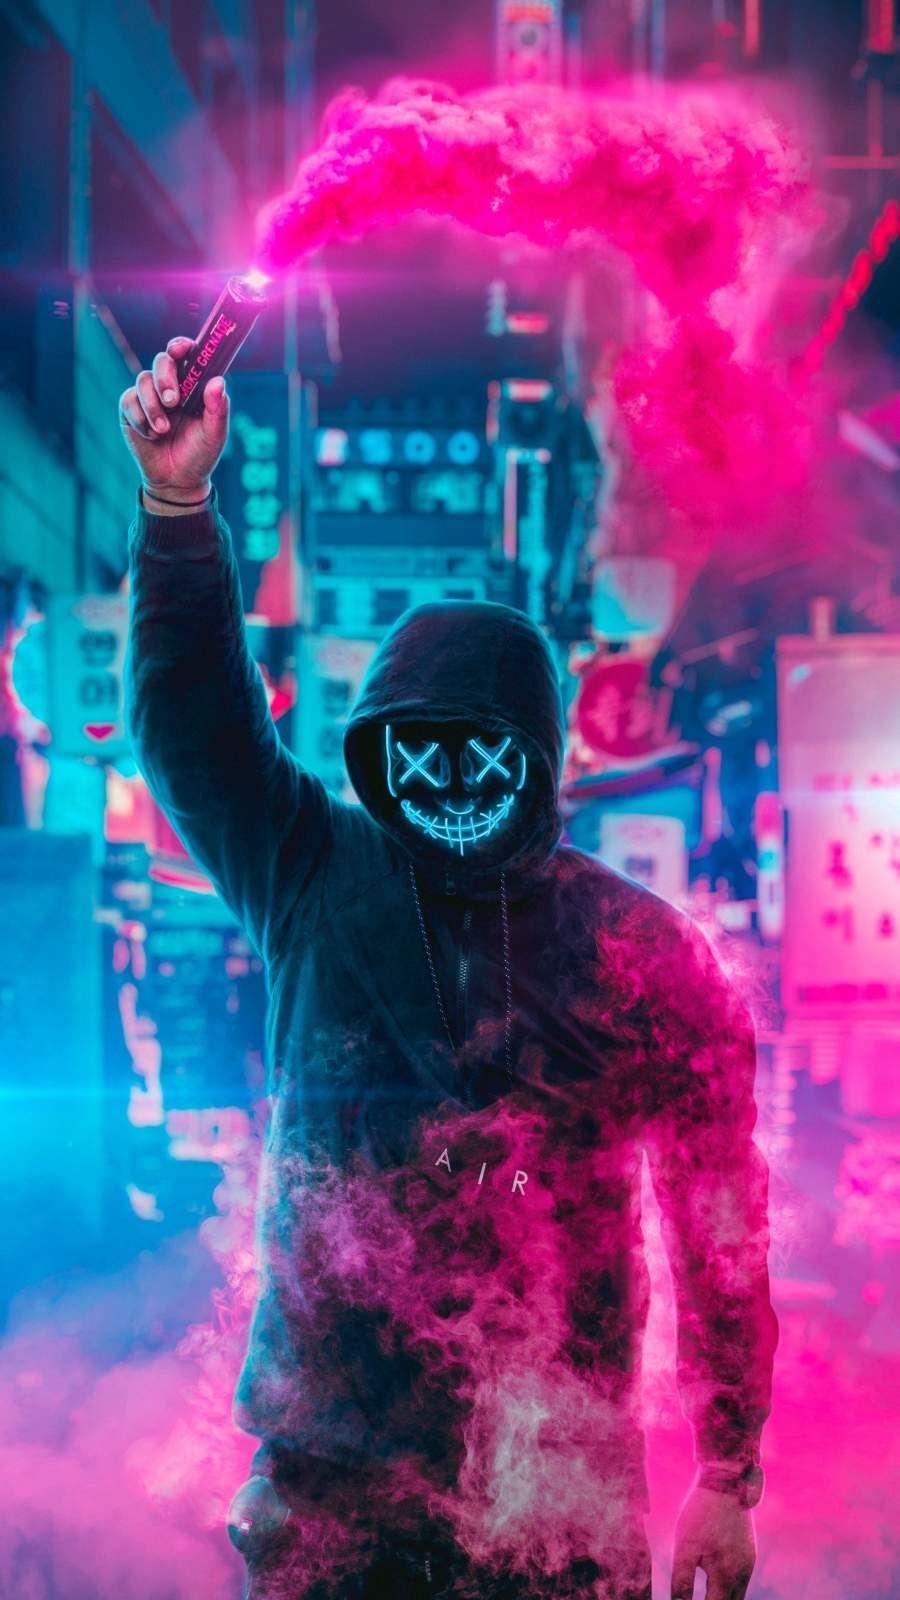 iPhone Wallpaper for iPhone iPhone 8 Plus, iPhone 6s, iPhone 6s Plus, iPhone X and iPod Touch High Qual. Smoke wallpaper, Graffiti wallpaper, Joker wallpaper